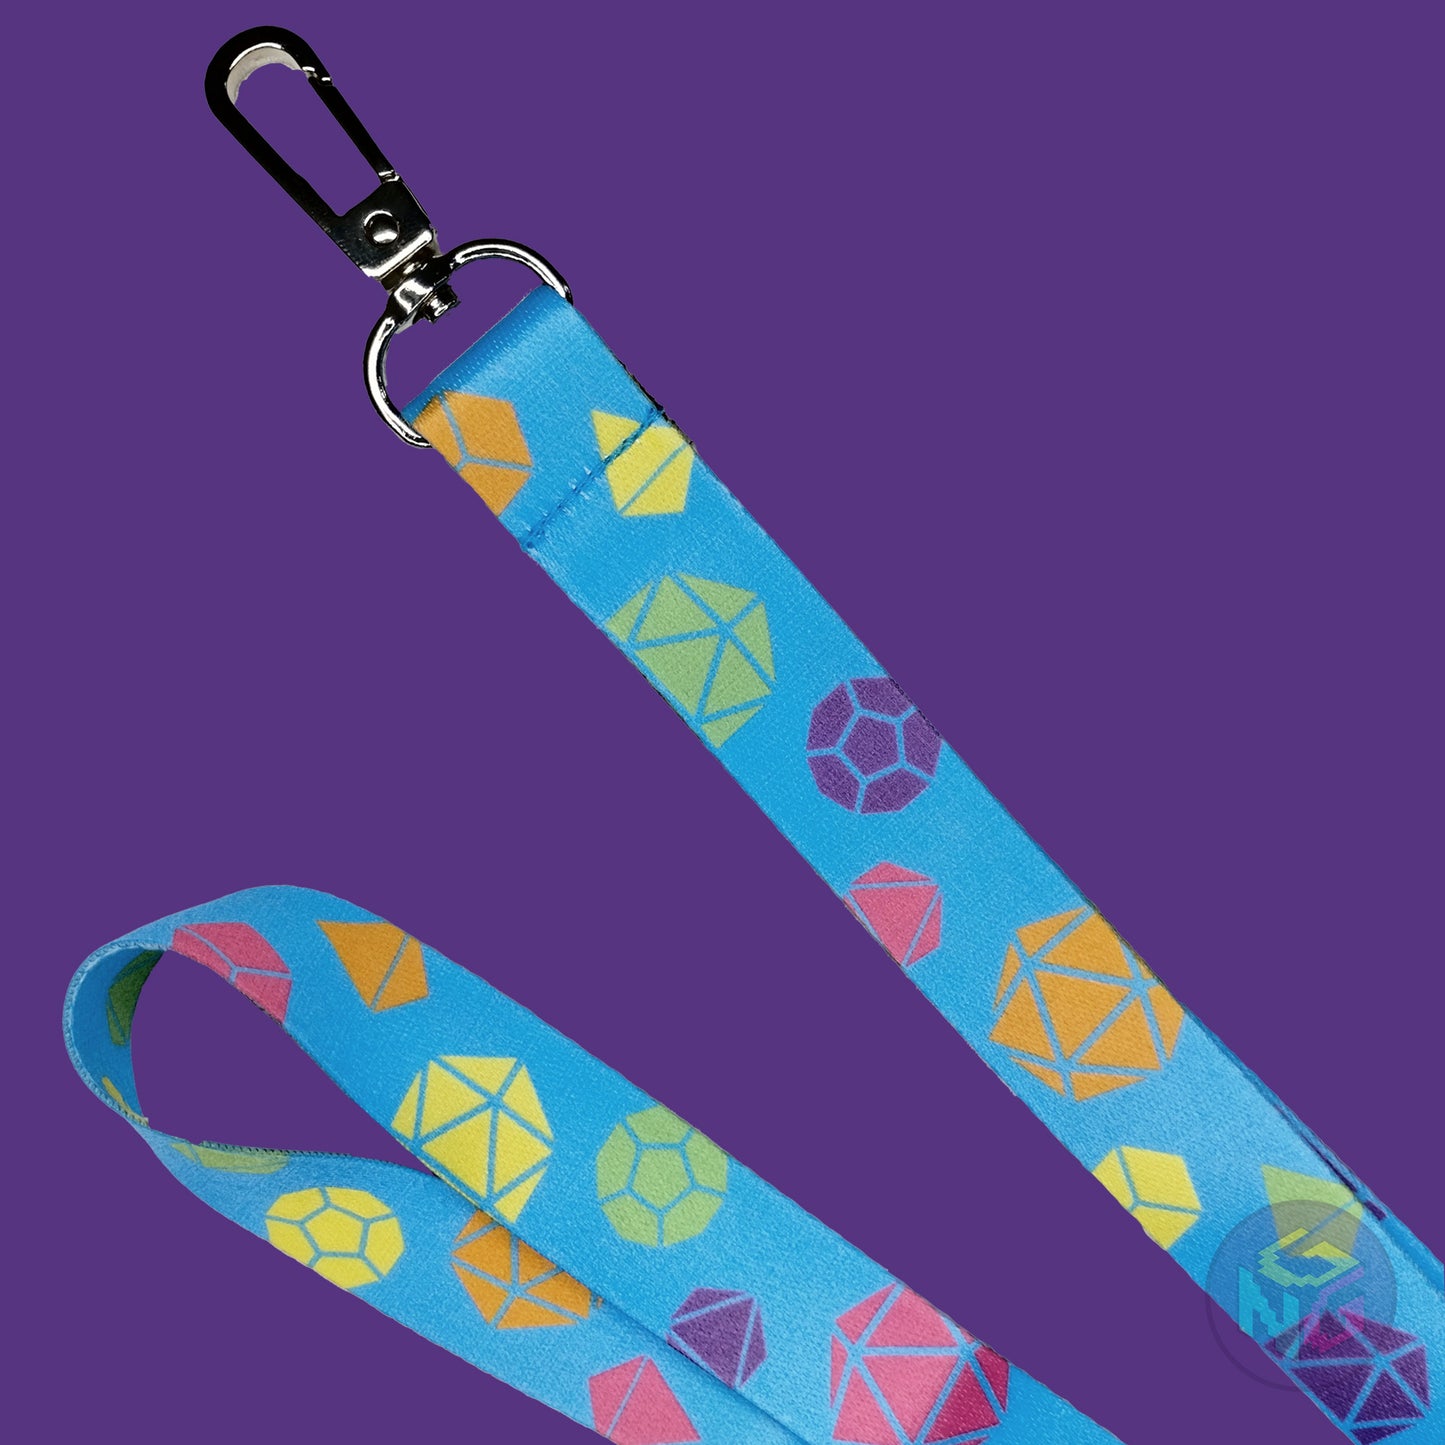 close up detail of the rainbow dungeons and dragons lanyard showing the lobster clasp, green d20s, orange d6s, yellow d4s, purple d12s, pink d8s, and other dice